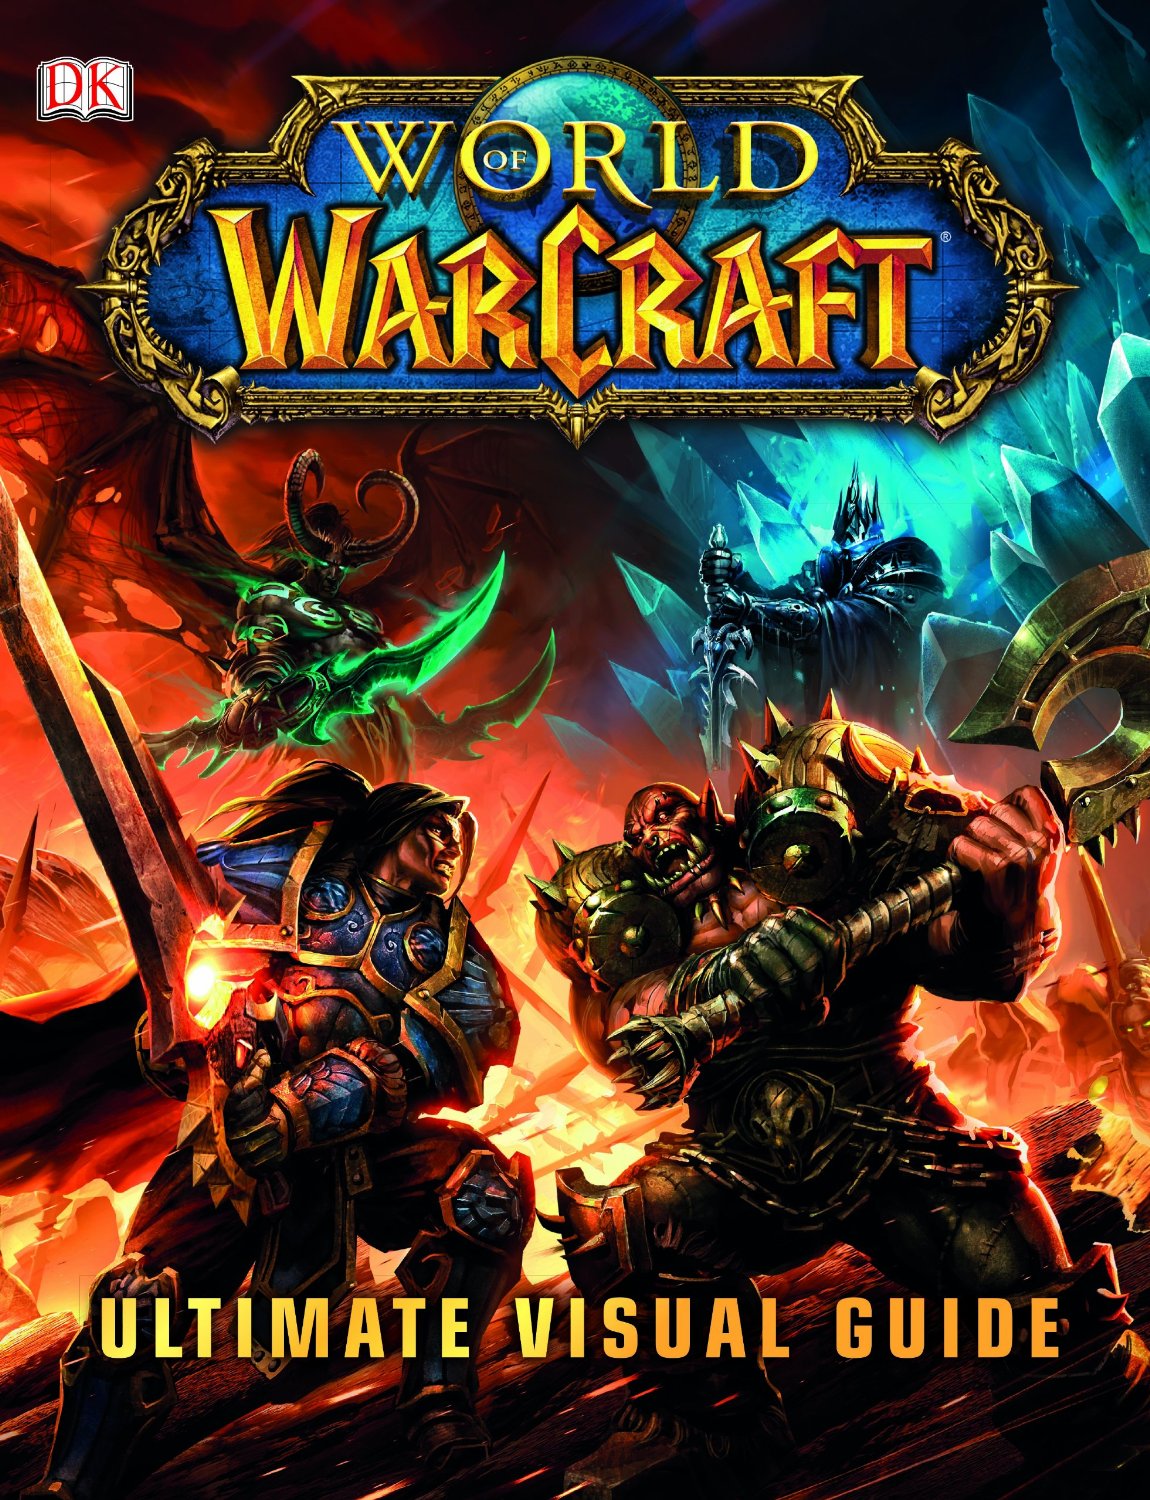 Blizzard Entertainment Licenses DK Publishing to Launch World of Warcraft: Ultimate Visual Guide